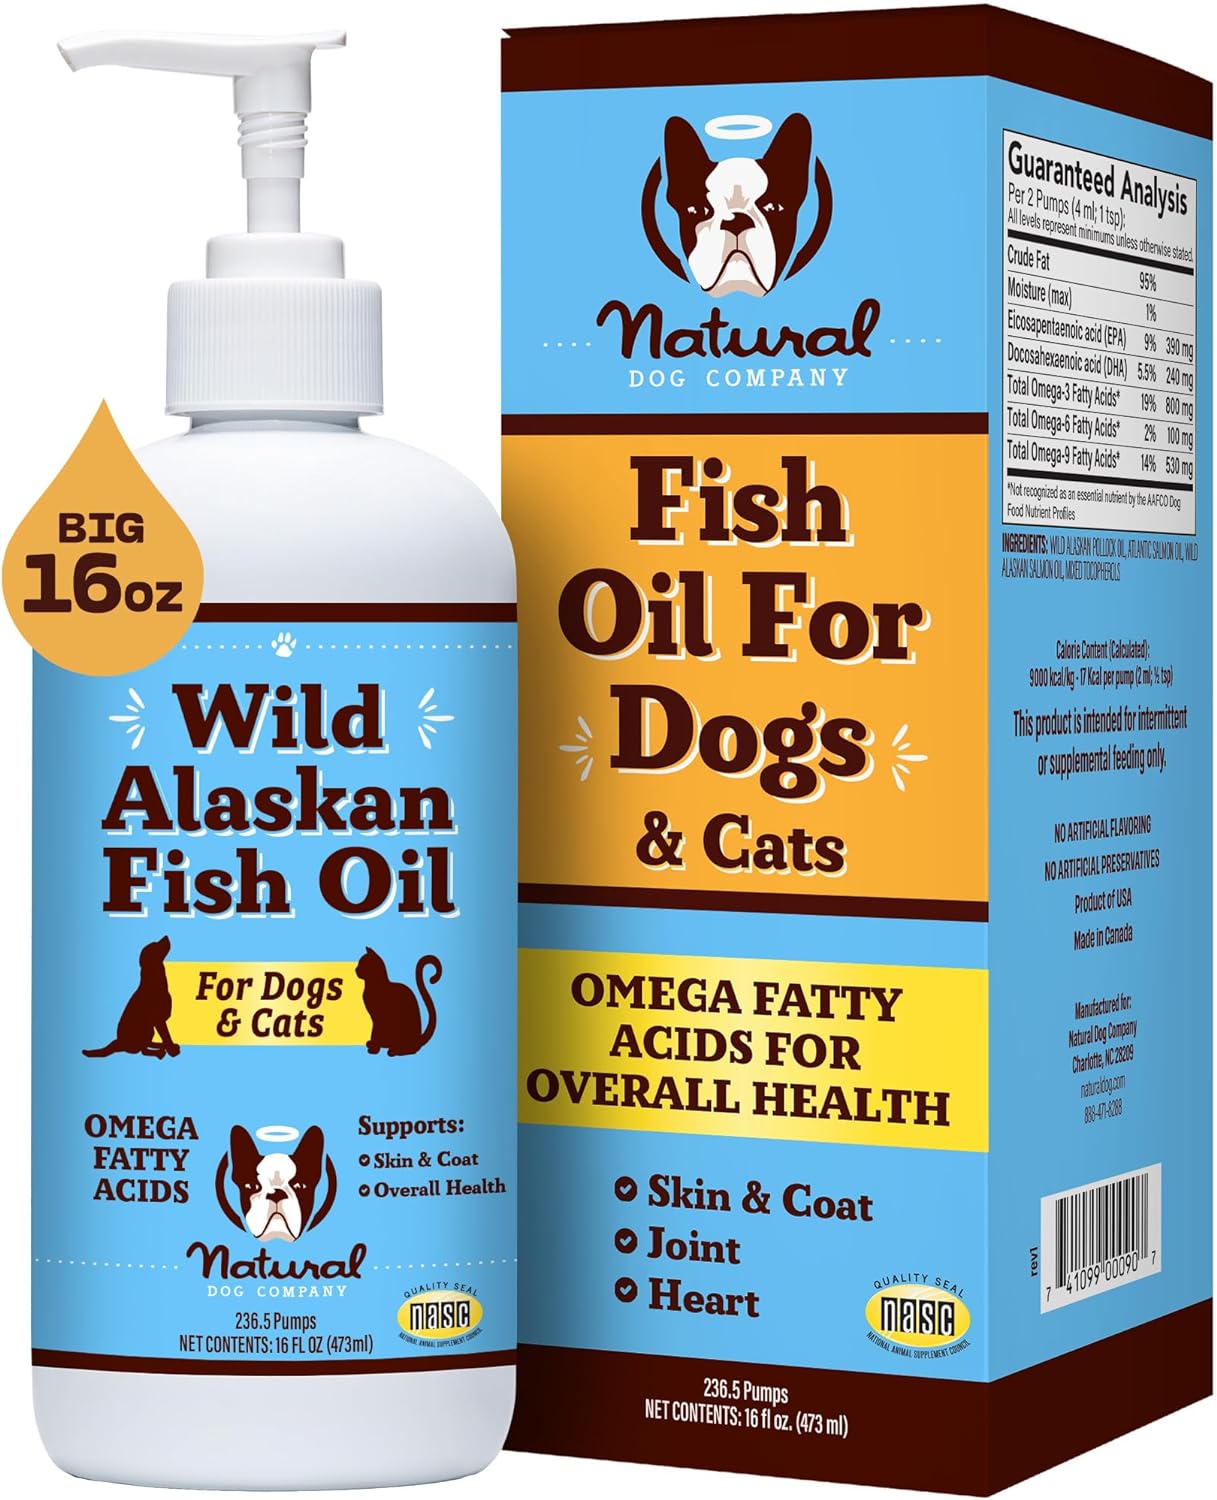 Natural Dog Company Wild Alaskan Fish Oil for Dogs and Cats (16oz) - Blend of Wild Salmon & Pollock Oil - Omega 3 EPA & DHA - Reduces Shedding, Nourishes Skin, Coat & Joints, Fish Oil for Cats